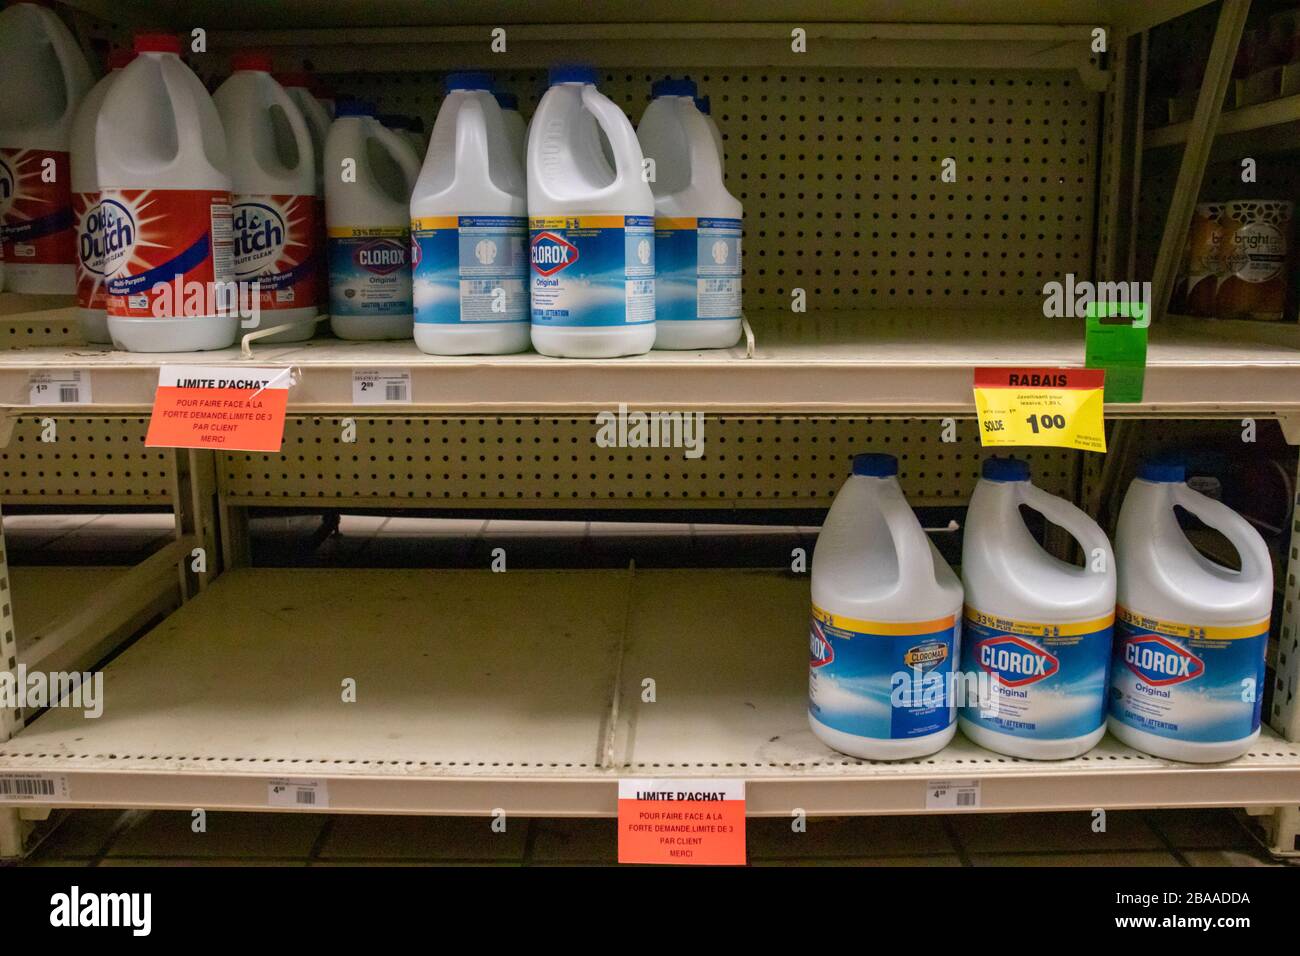 March 24, 2020 - Montreal, Qc :Low Stock of Clorox & Old Dutch Bleach Bottles on shelves, Coronavirus (COVID-19) Pandemic Crisis, Canadian Tire Store Stock Photo